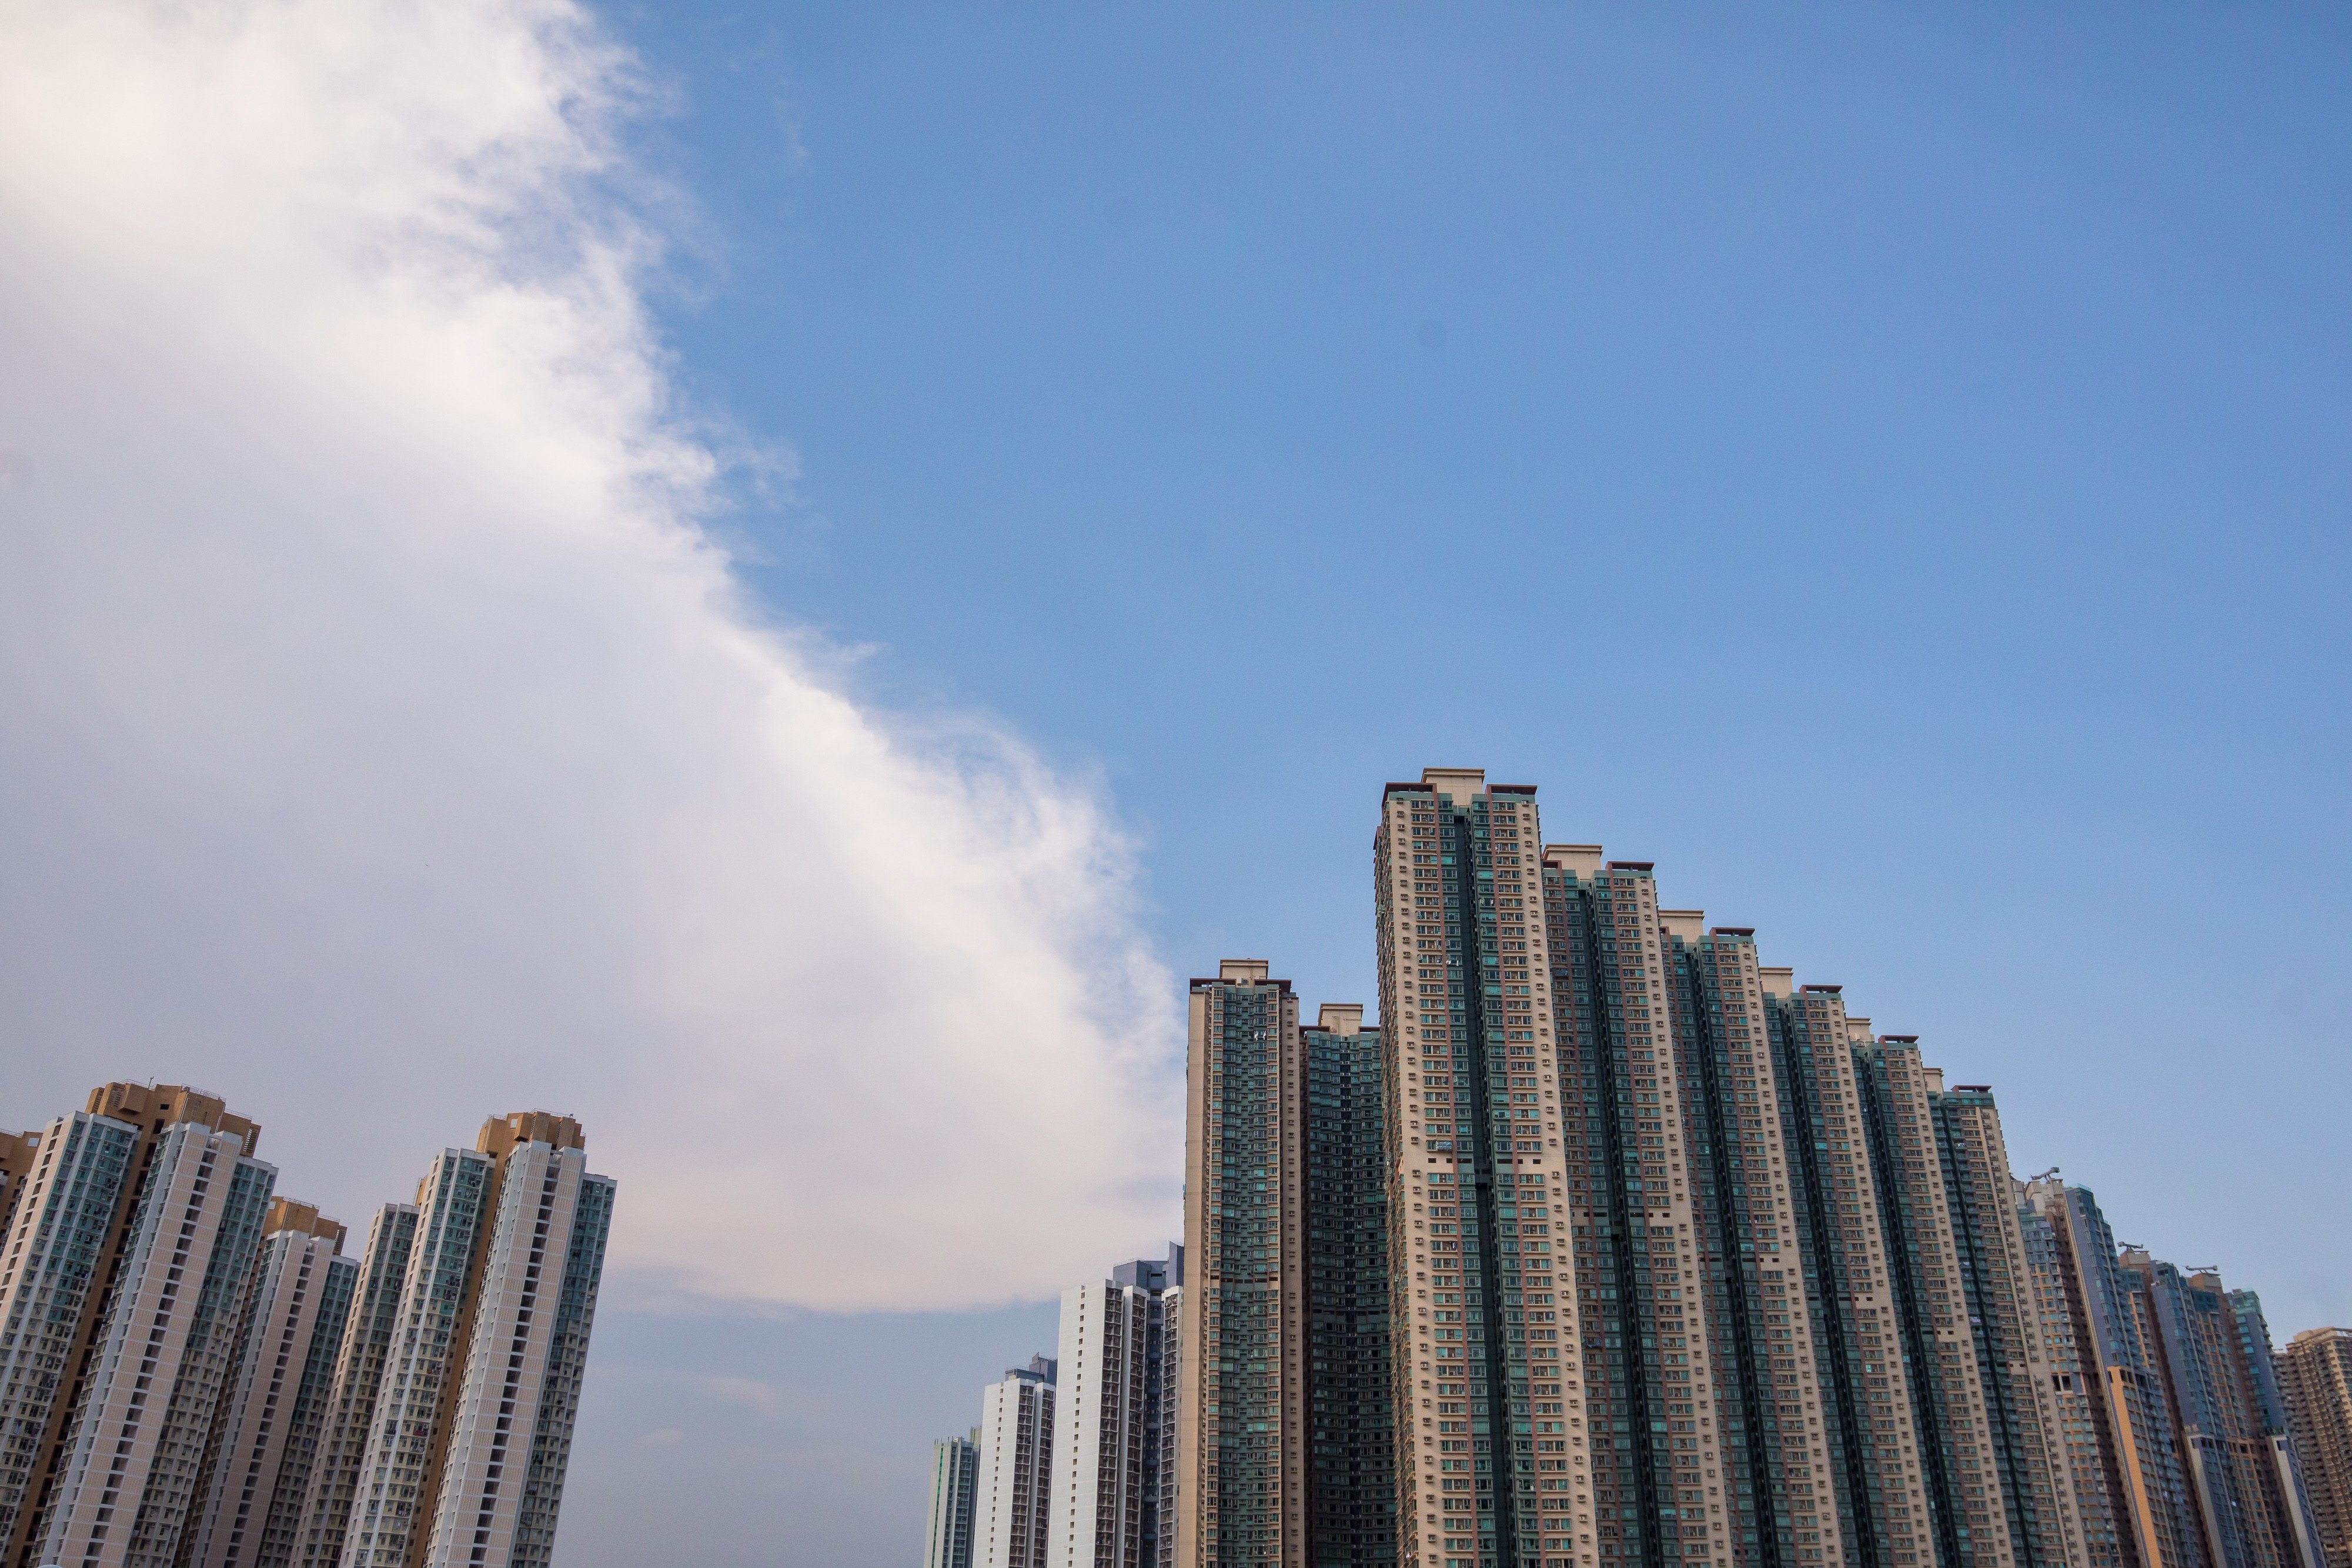 Public and private housing estates in Tseung Kwan O, one of the new towns built by the government in the 1980s. Photo: Bloomberg